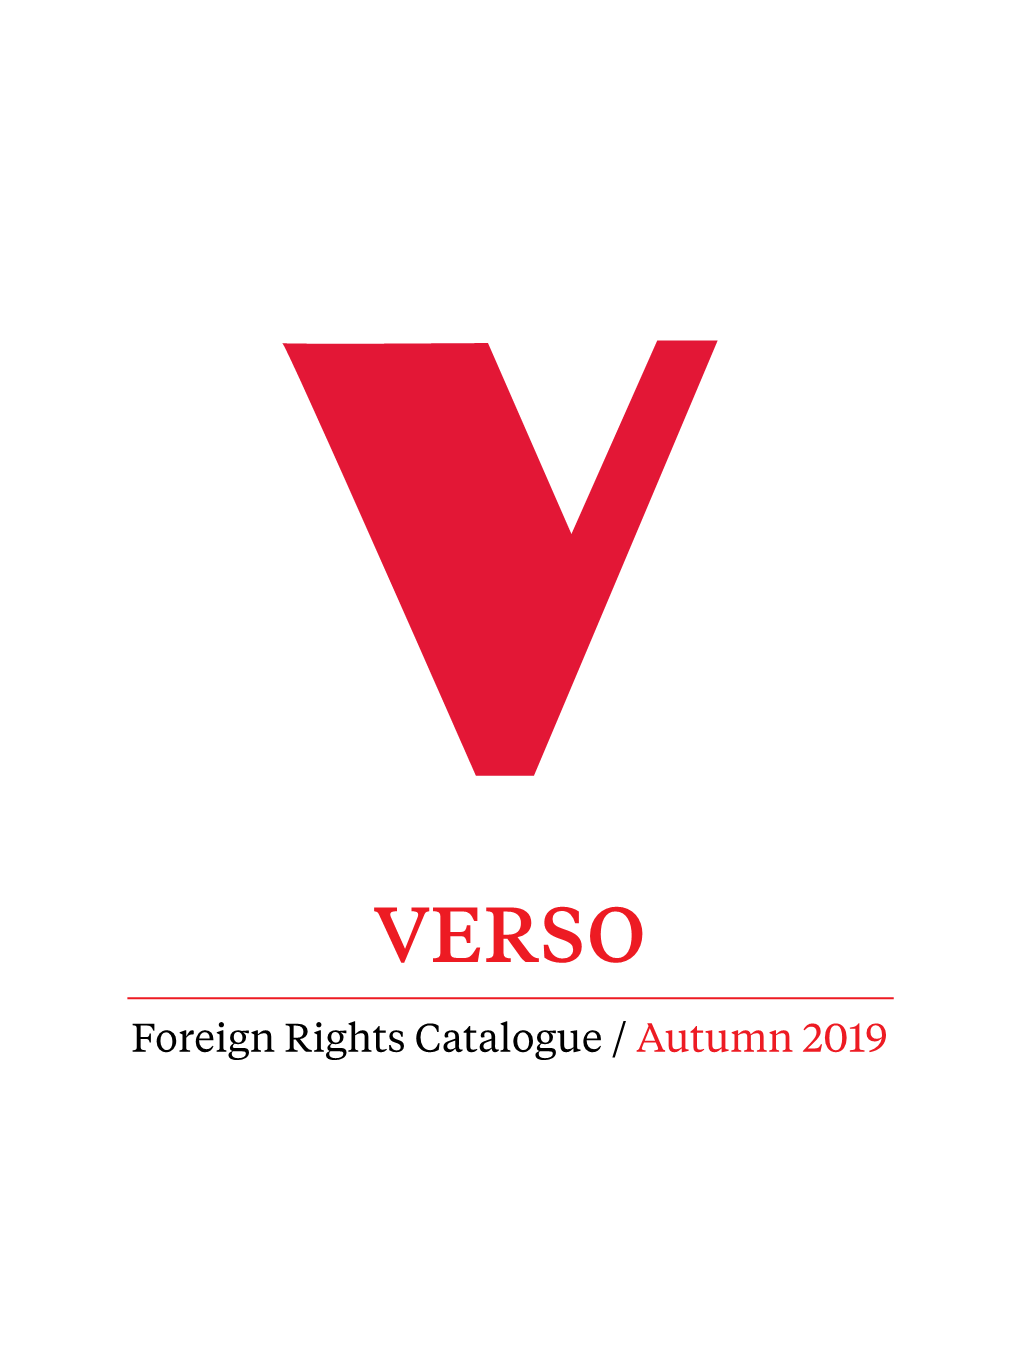 Foreign Rights Catalogue / Autumn 2019 Contents